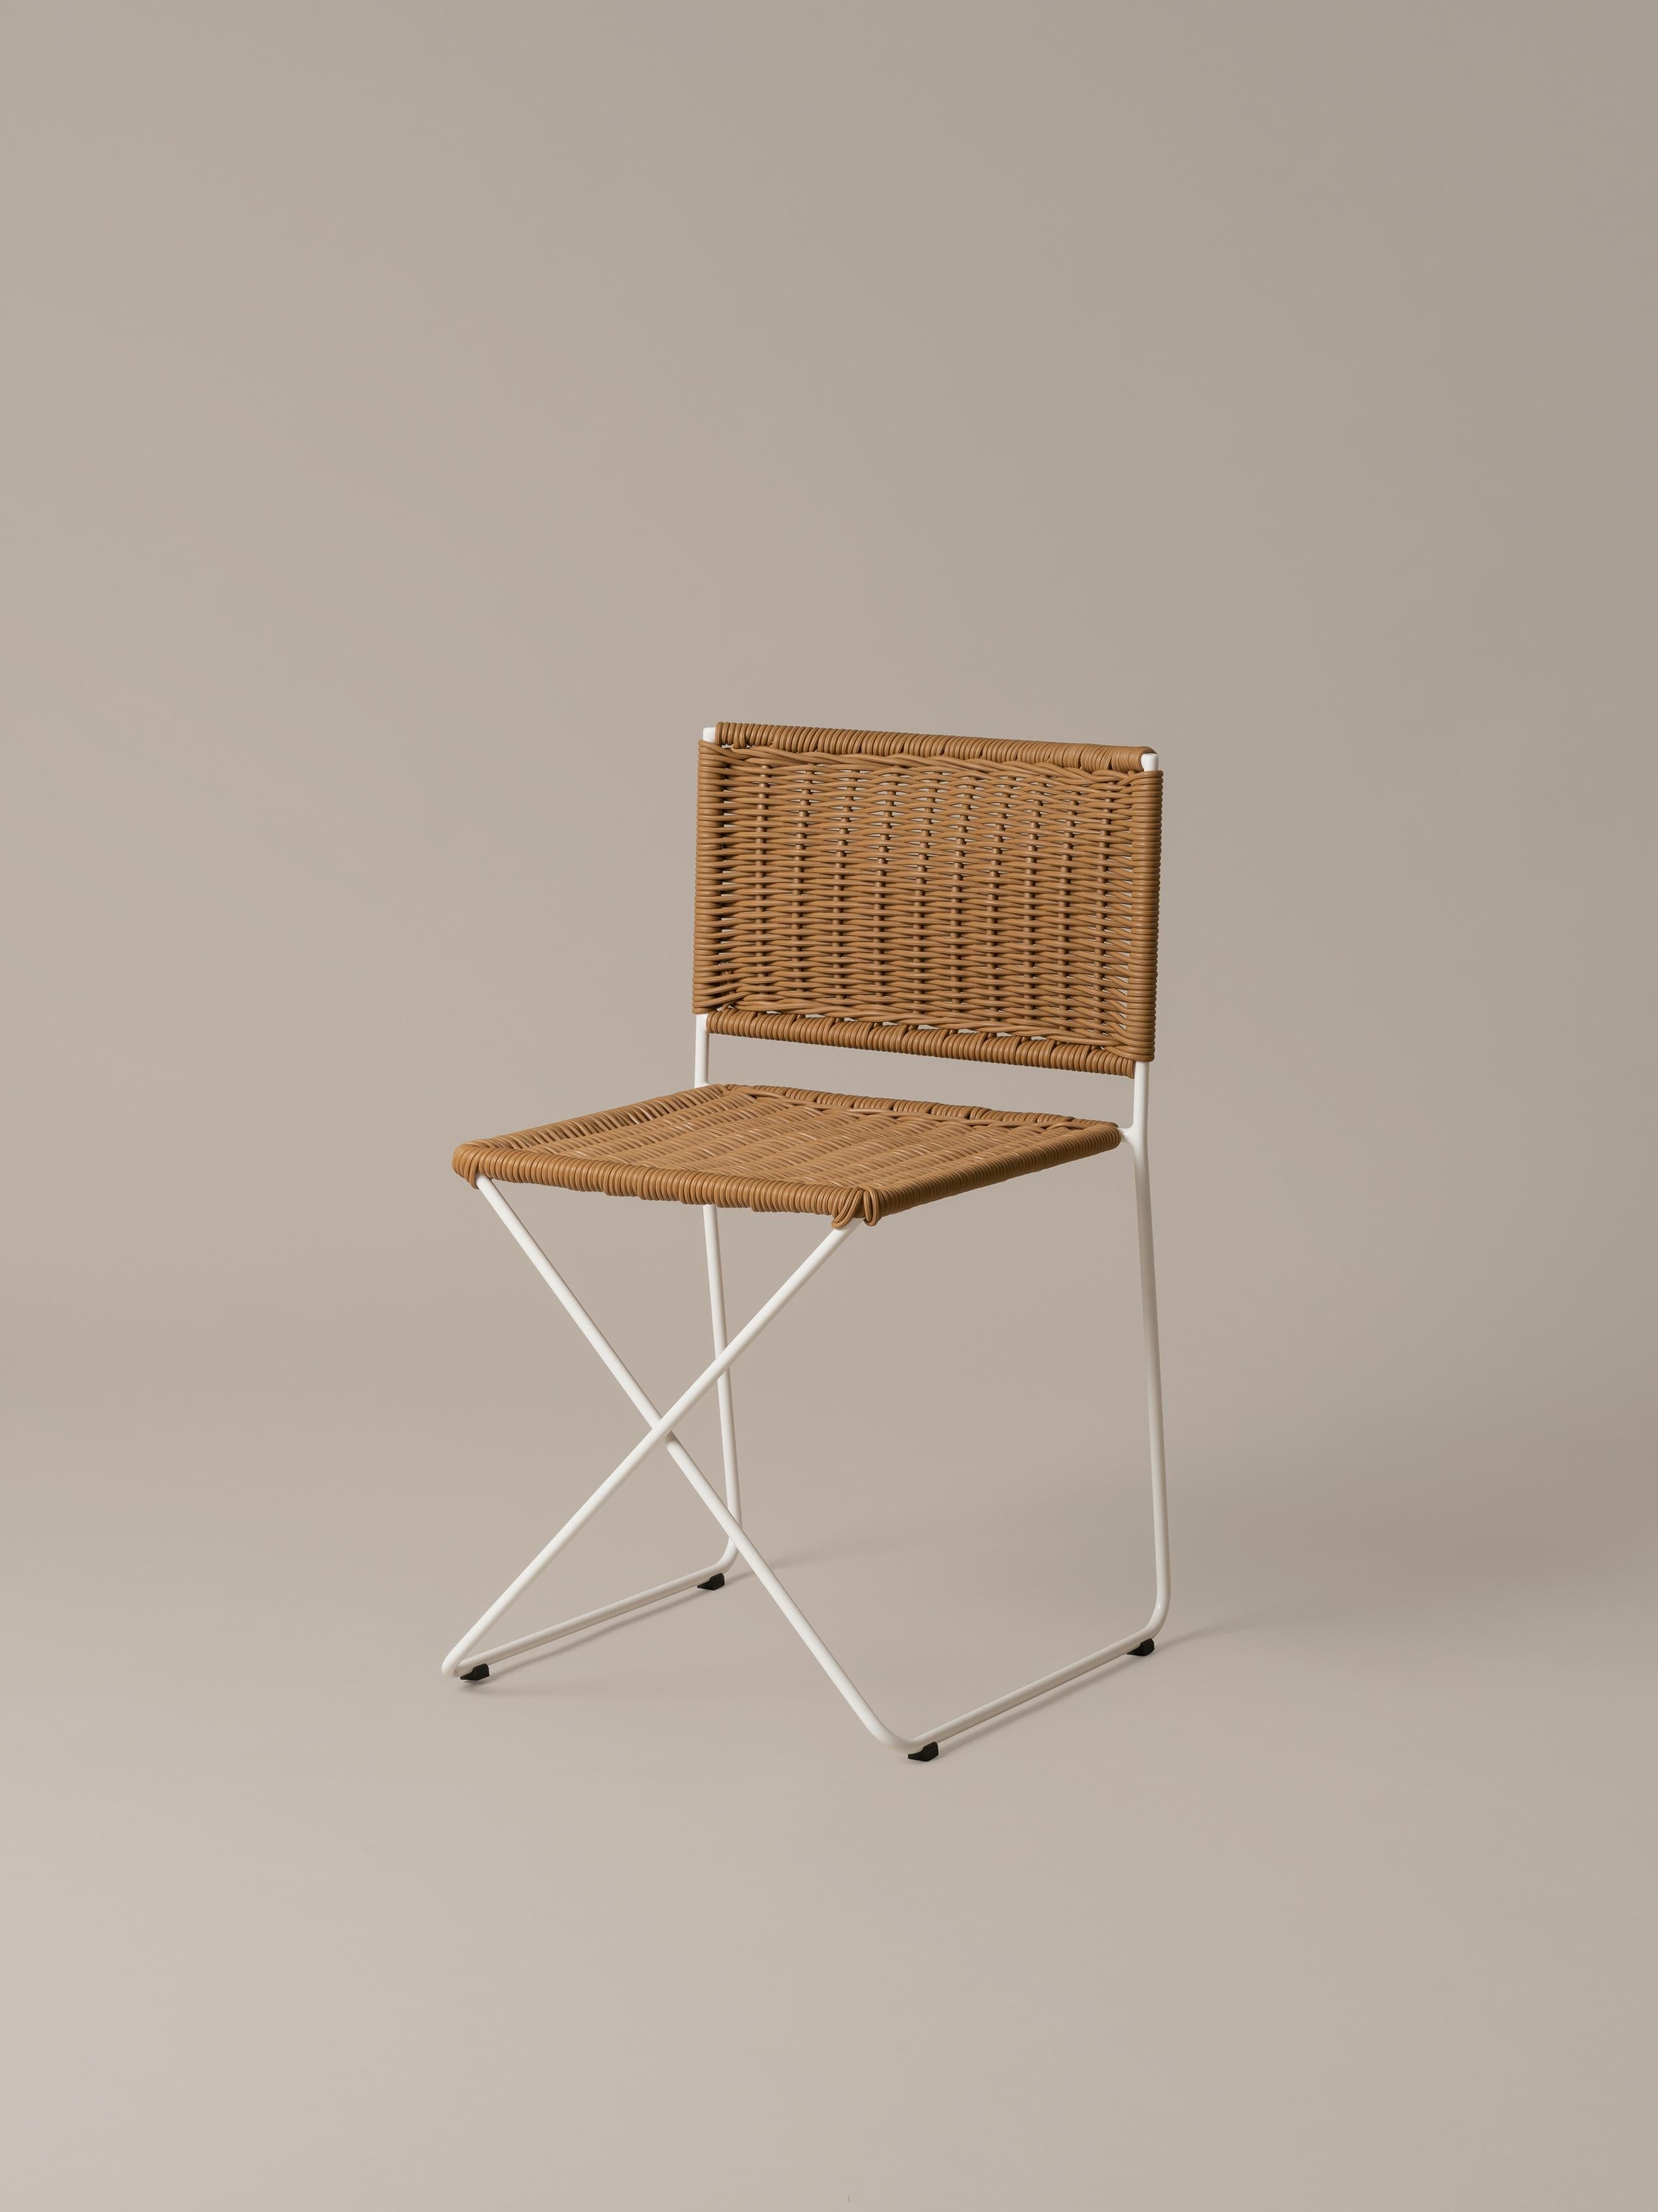 Set of 4 natural Ramón chair by Ramón Bigas
Dimensions: D 45 x W 46 x H 75 cm
Materials: metal, rattan.
Available in white or natural rattan.

The Ramón chair is a carefree yet serious design suitable for both indoor and outdoor use. The white metal